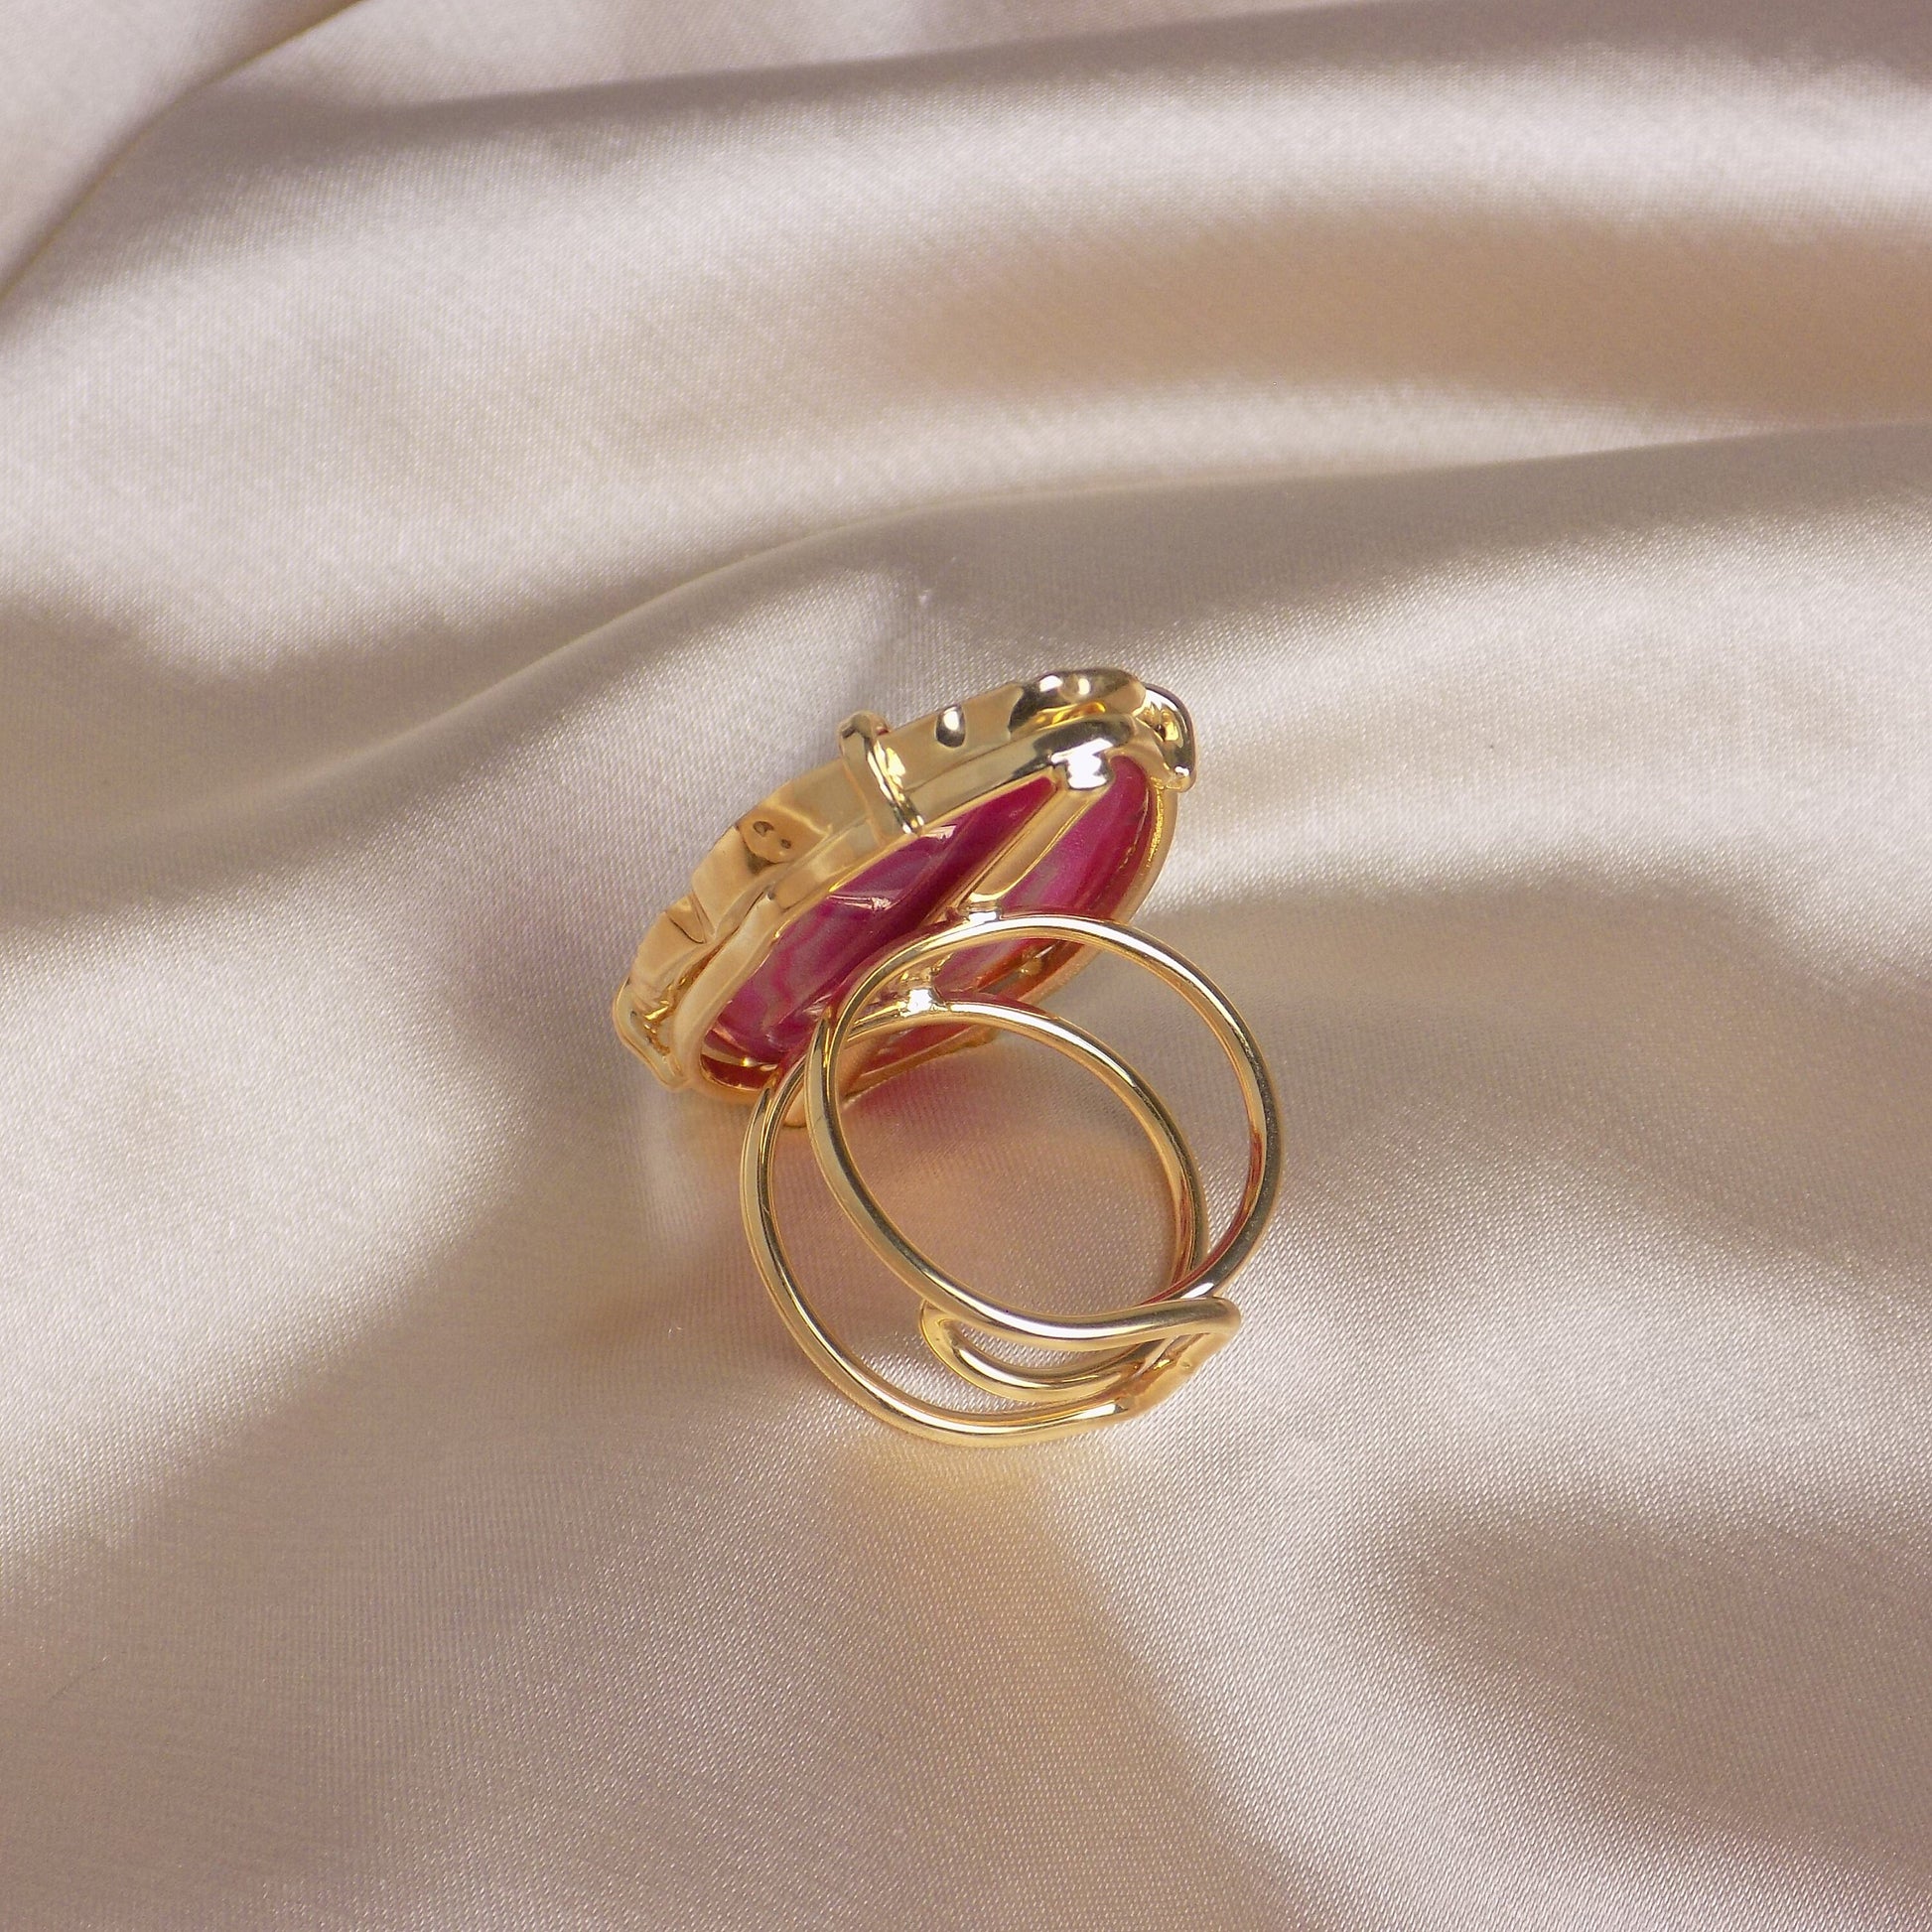 Unique Pink Agate Ring Gold Plated Adjustable - Boho Statement Jewelry